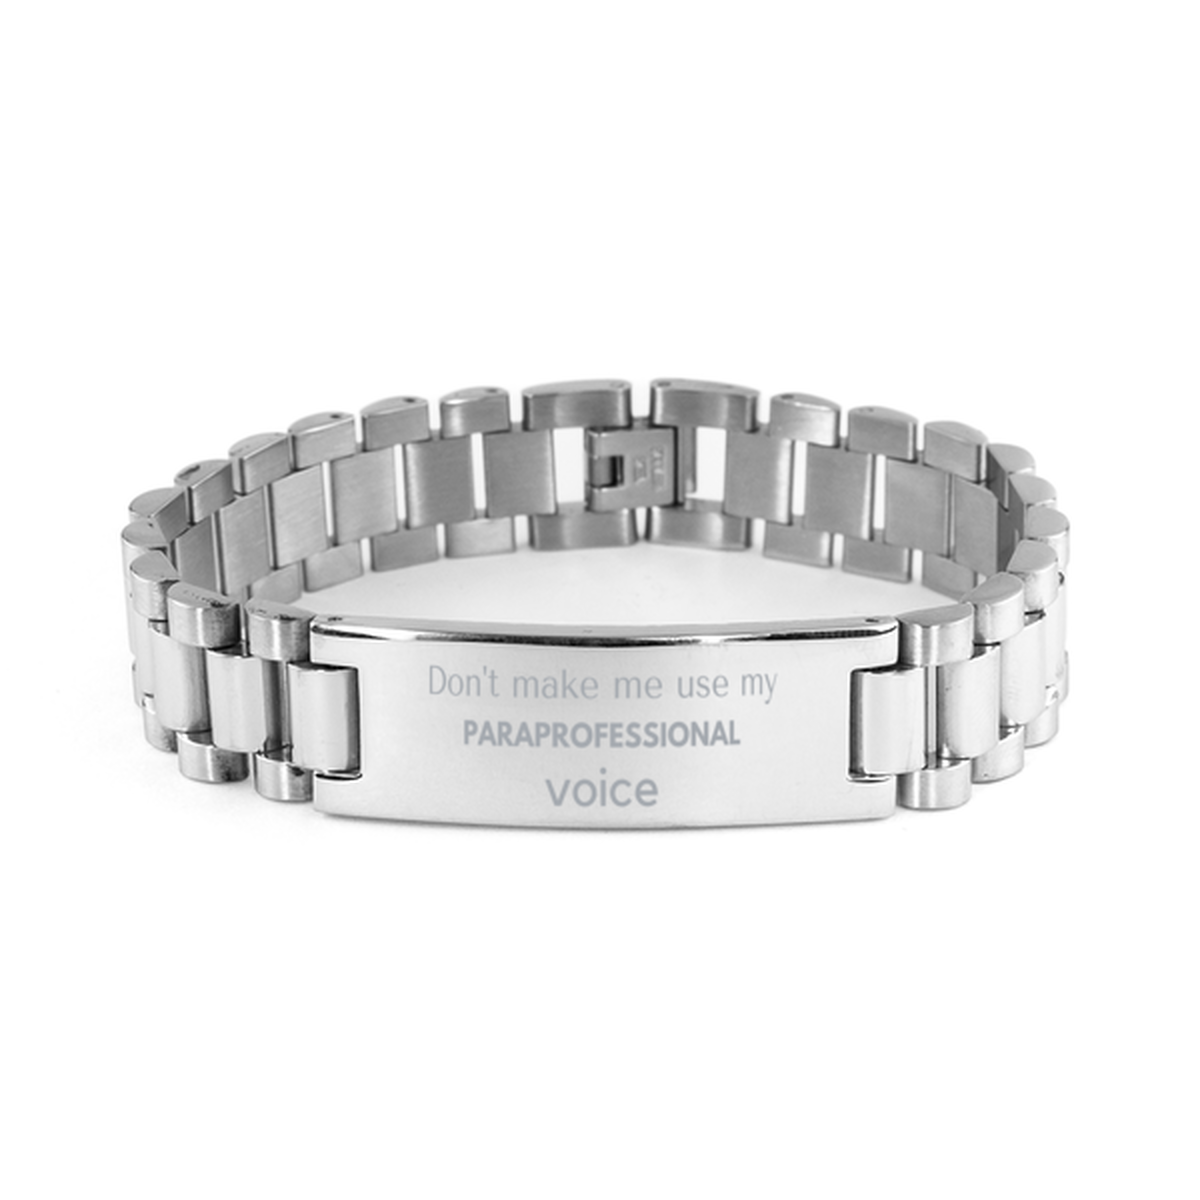 Don't make me use my Paraprofessional voice, Sarcasm Paraprofessional Gifts, Christmas Paraprofessional Ladder Stainless Steel Bracelet Birthday Unique Gifts For Paraprofessional Coworkers, Men, Women, Colleague, Friends